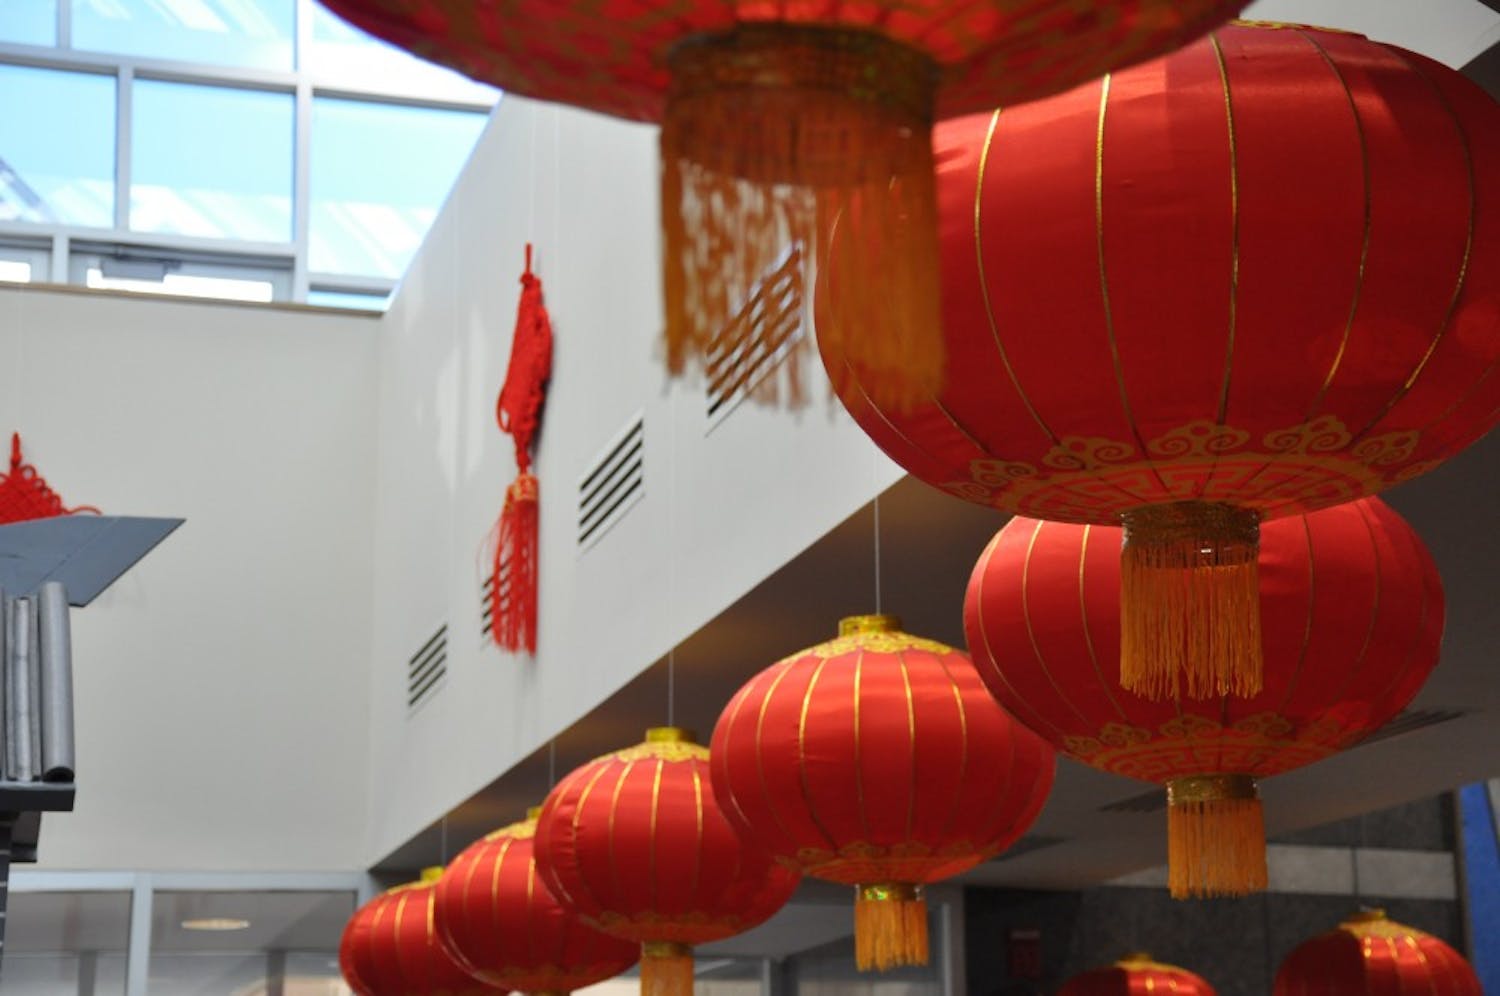 Lanterns hang in the Friday Center during the Chinese New Year Festival on Sunday, February 18th.